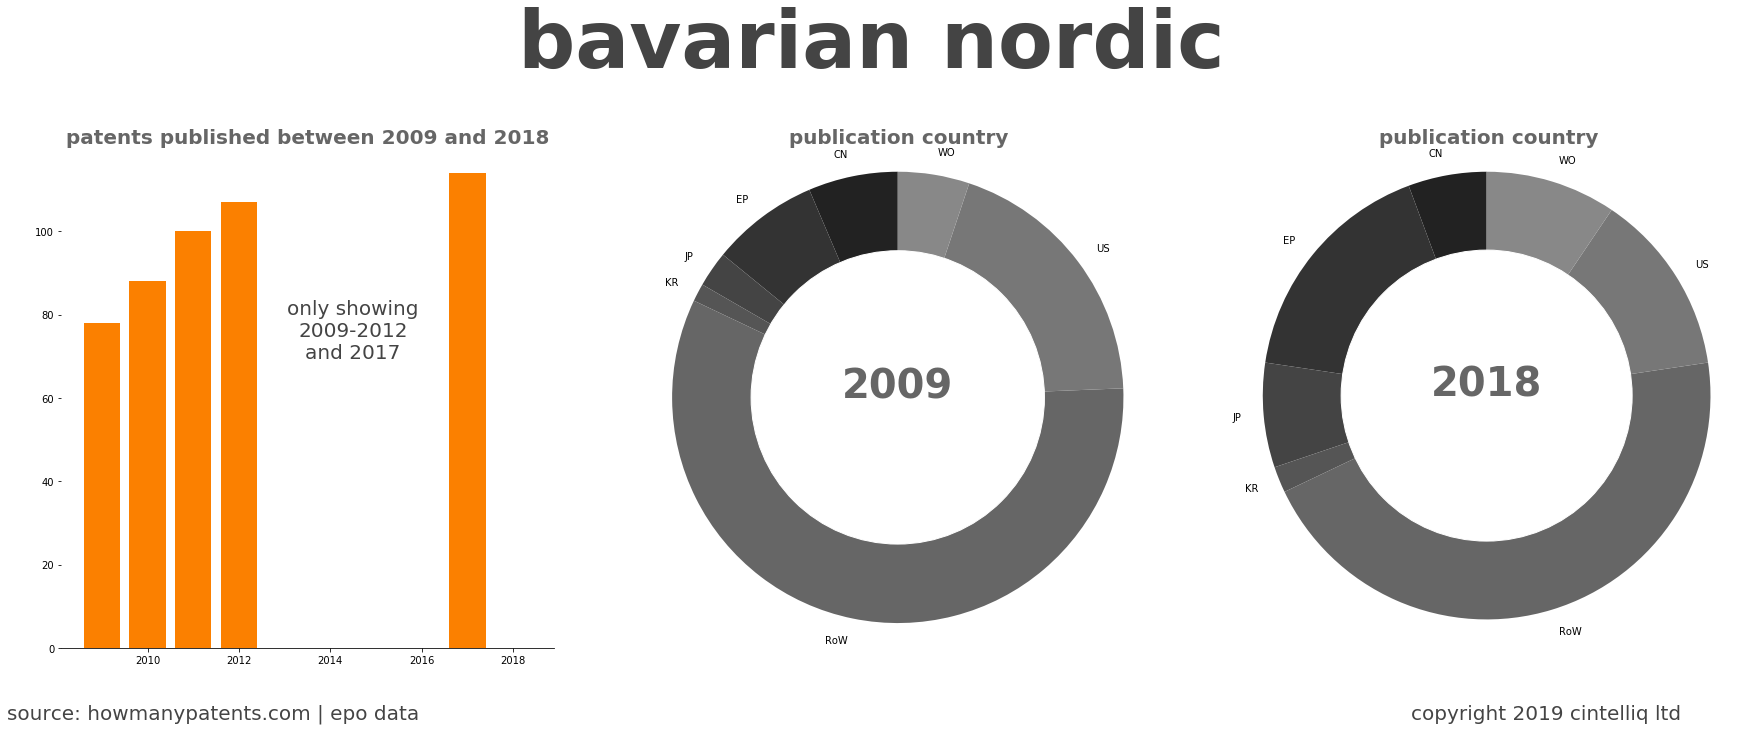 summary of patents for Bavarian Nordic